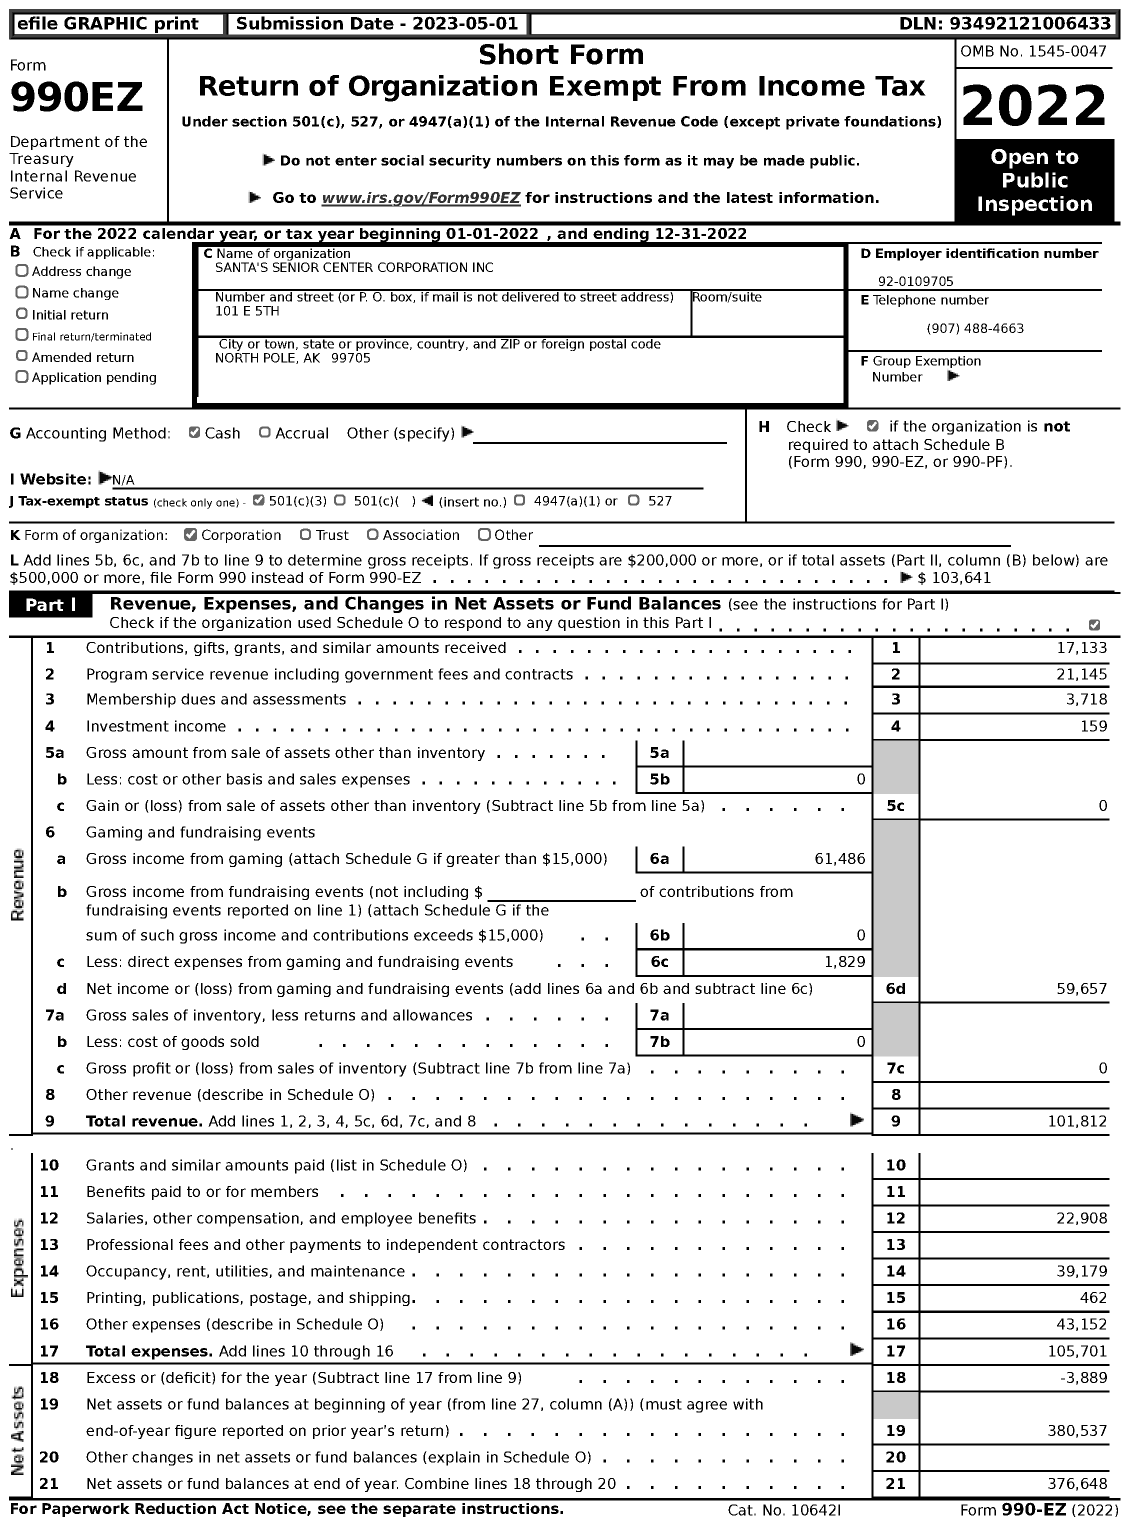 Image of first page of 2022 Form 990EZ for Santa's Senior Center Corporation